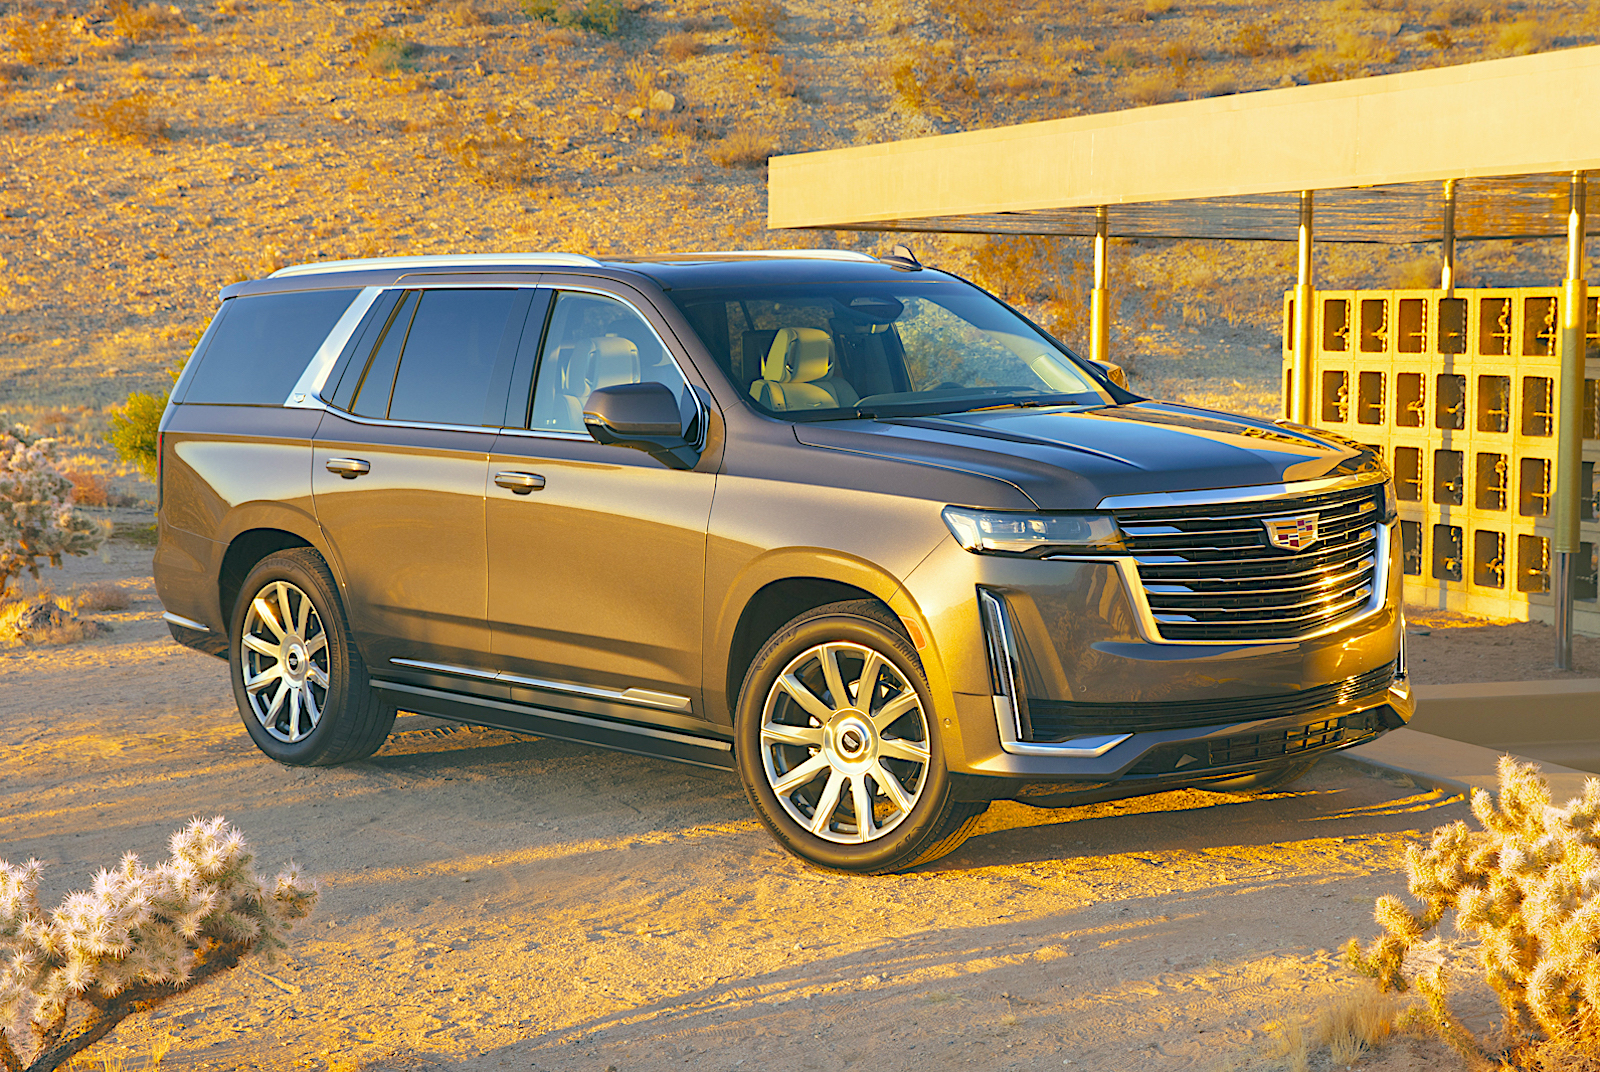 2021-cadillac-escalade-gold - The Fast Lane Truck